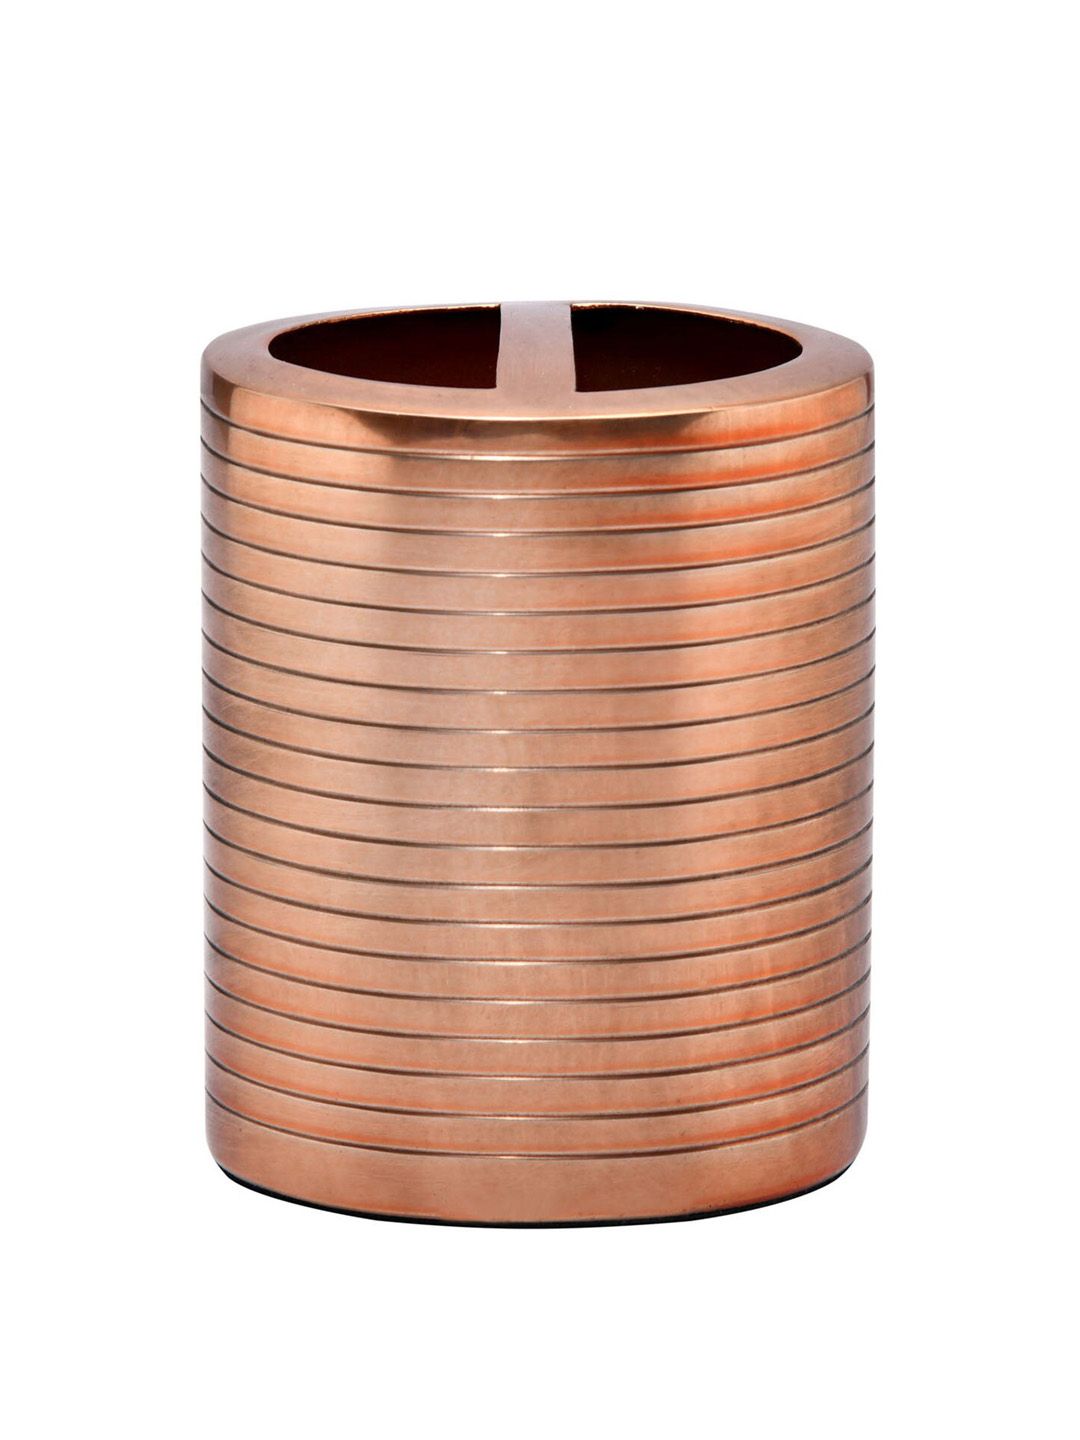 Athome by Nilkamal Copper-Toned Metal Toothbrush Holder Price in India